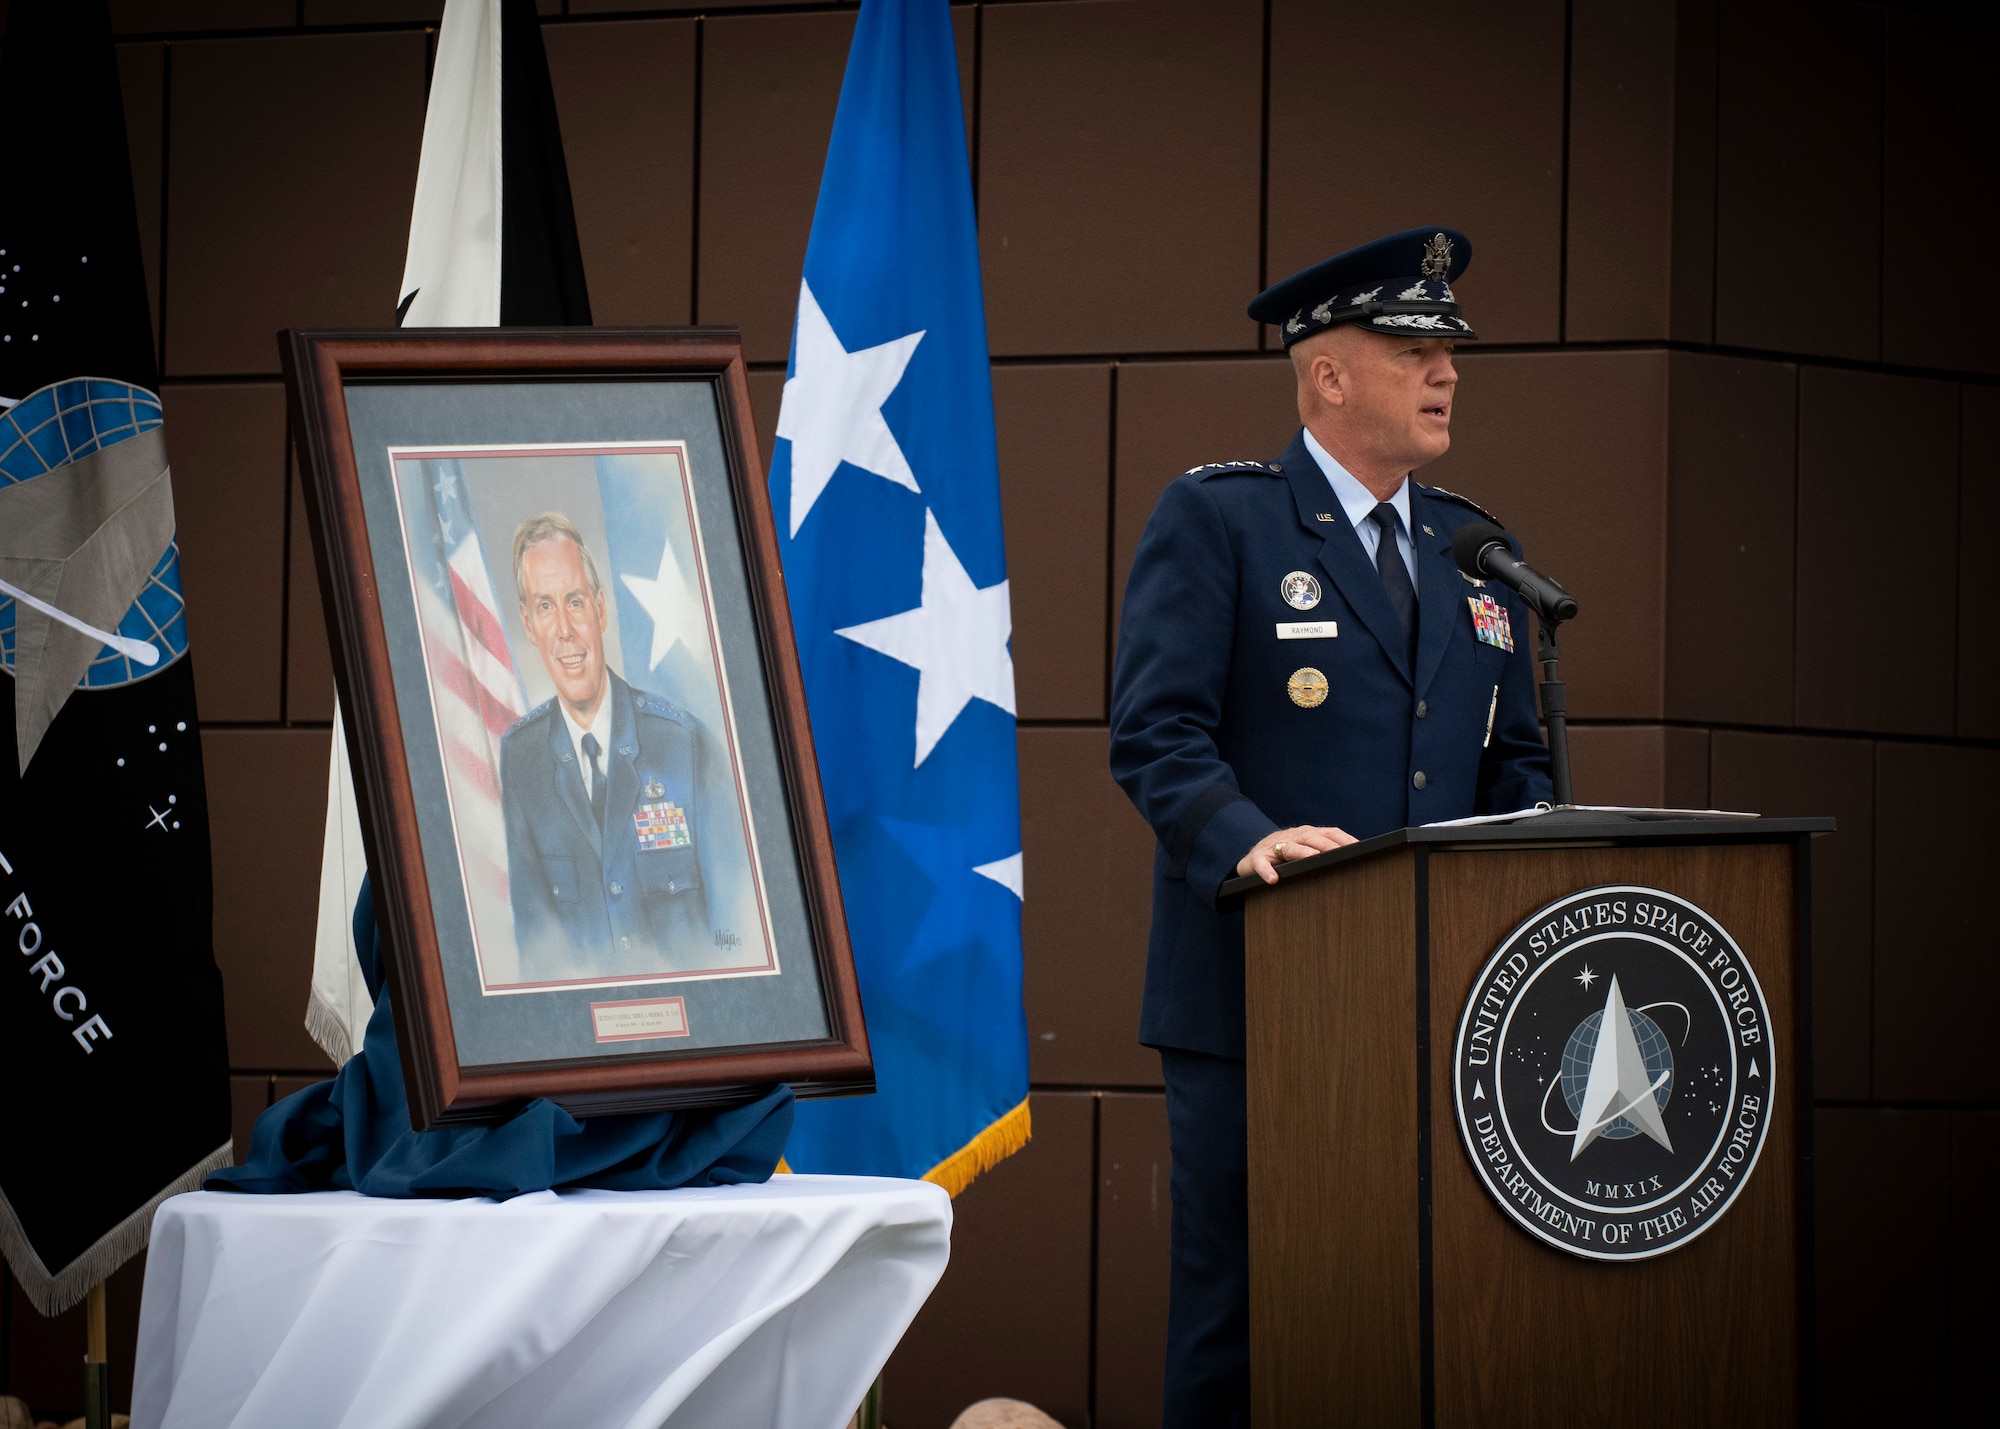 Gen. John W. “Jay” Raymond, U.S. Space Force Chief of Space Operations and Commander, U.S. Space Command, addresses attendees during the Gen. Moorman Tribute ceremony at the Moorman Education and Training Center at Peterson Air Force Base, Colorado, Aug. 3, 2020.